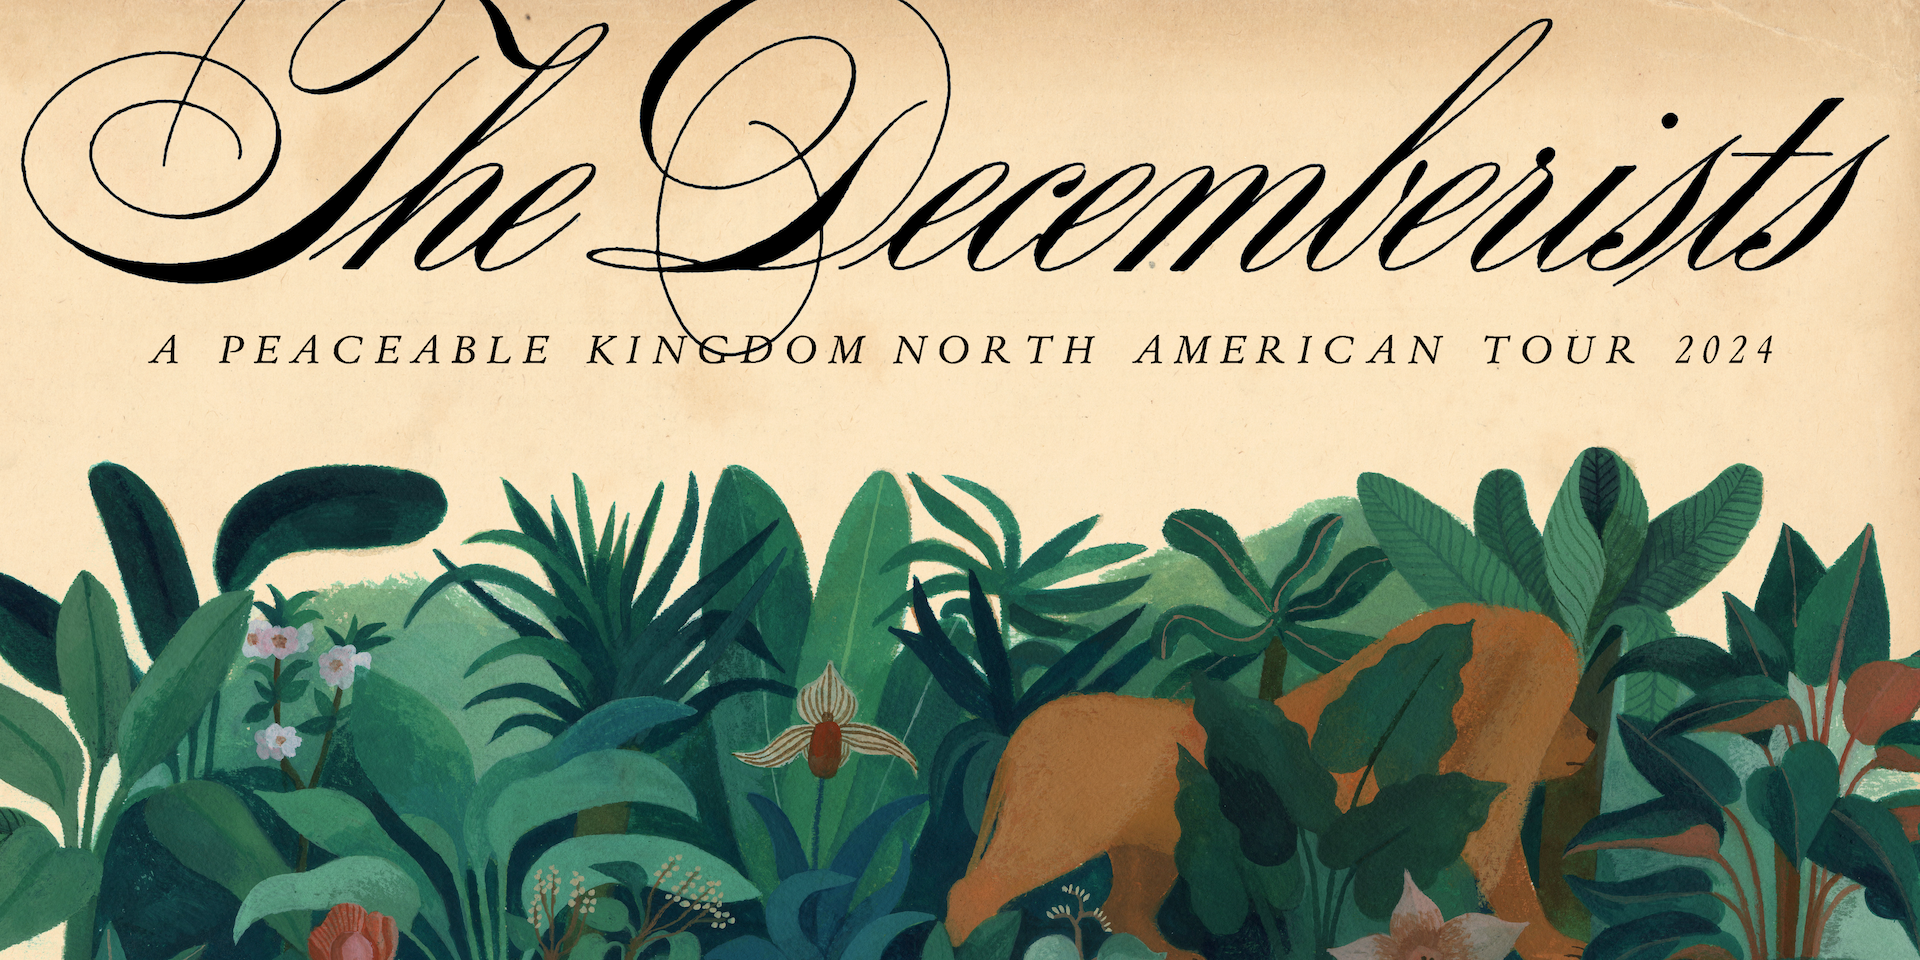 The Decemberists announcement